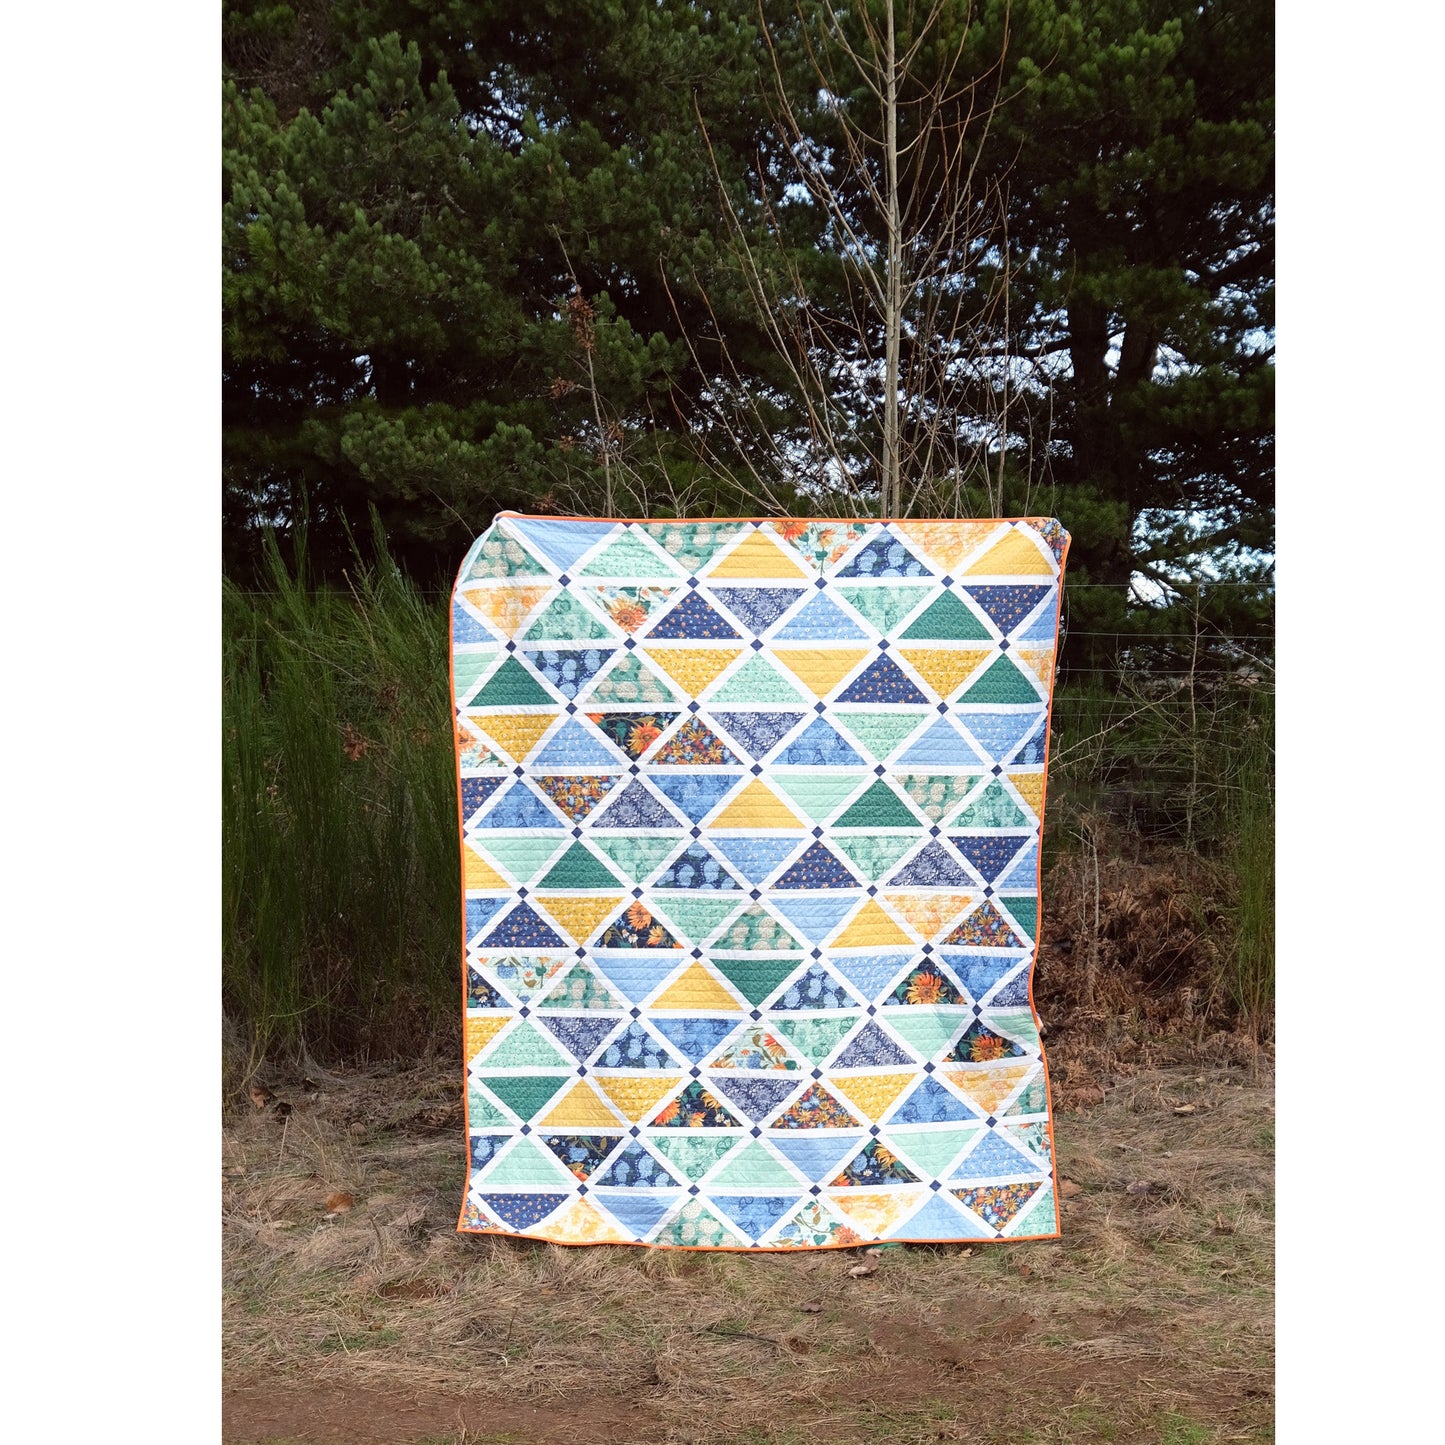 Kitchen Table Quilting - The Nina Quilt Pattern